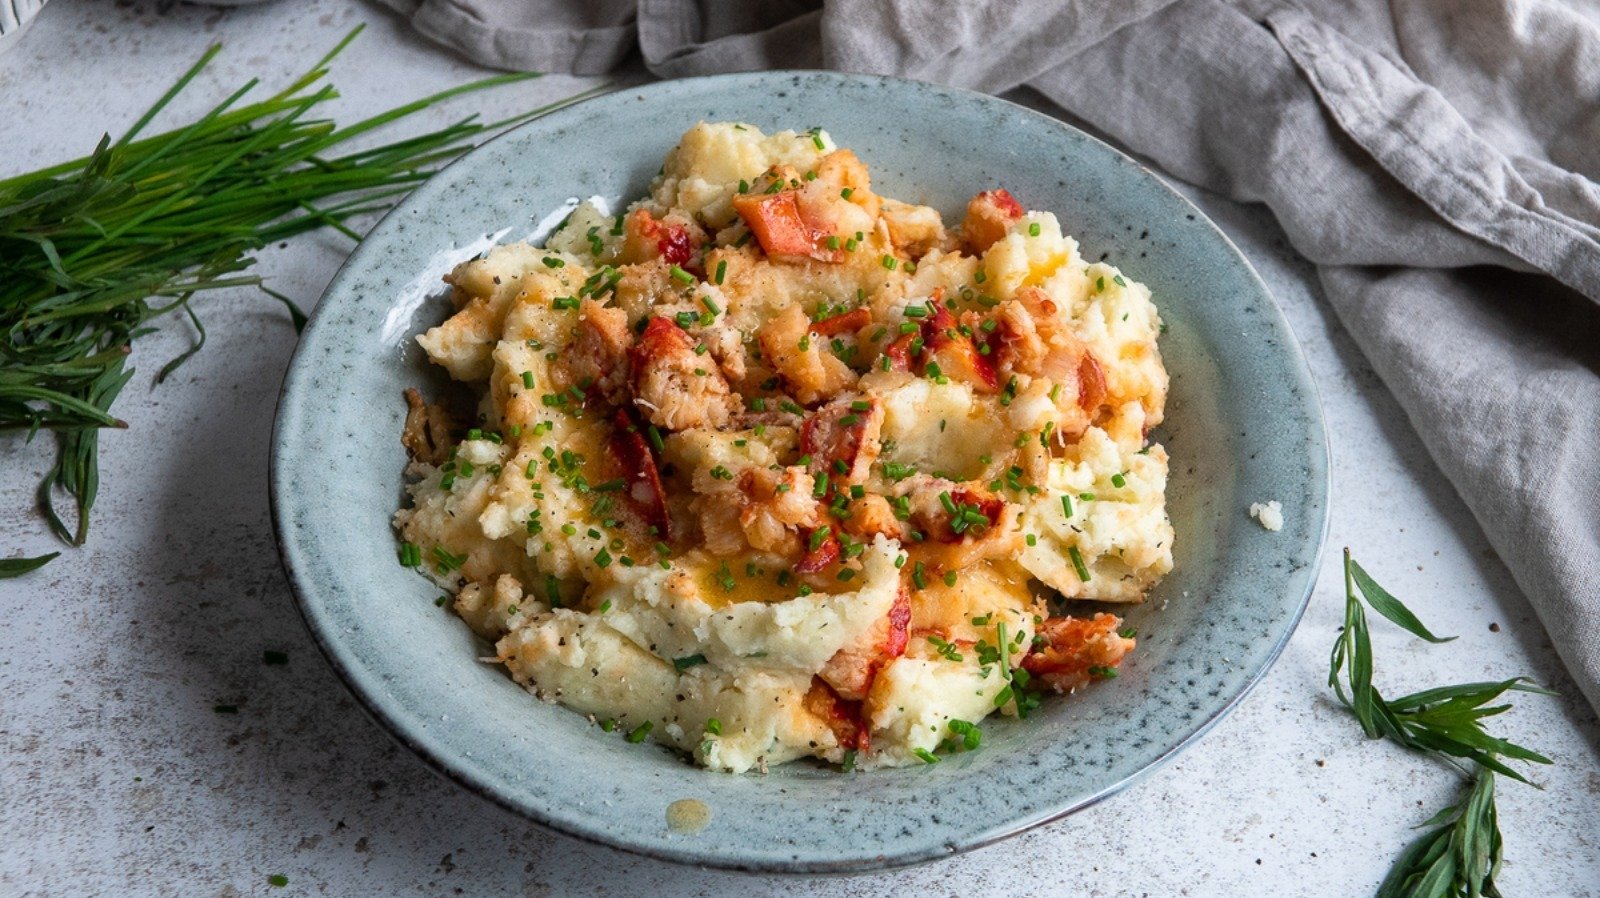 You've Never Had Mashed Potatoes Like This Before